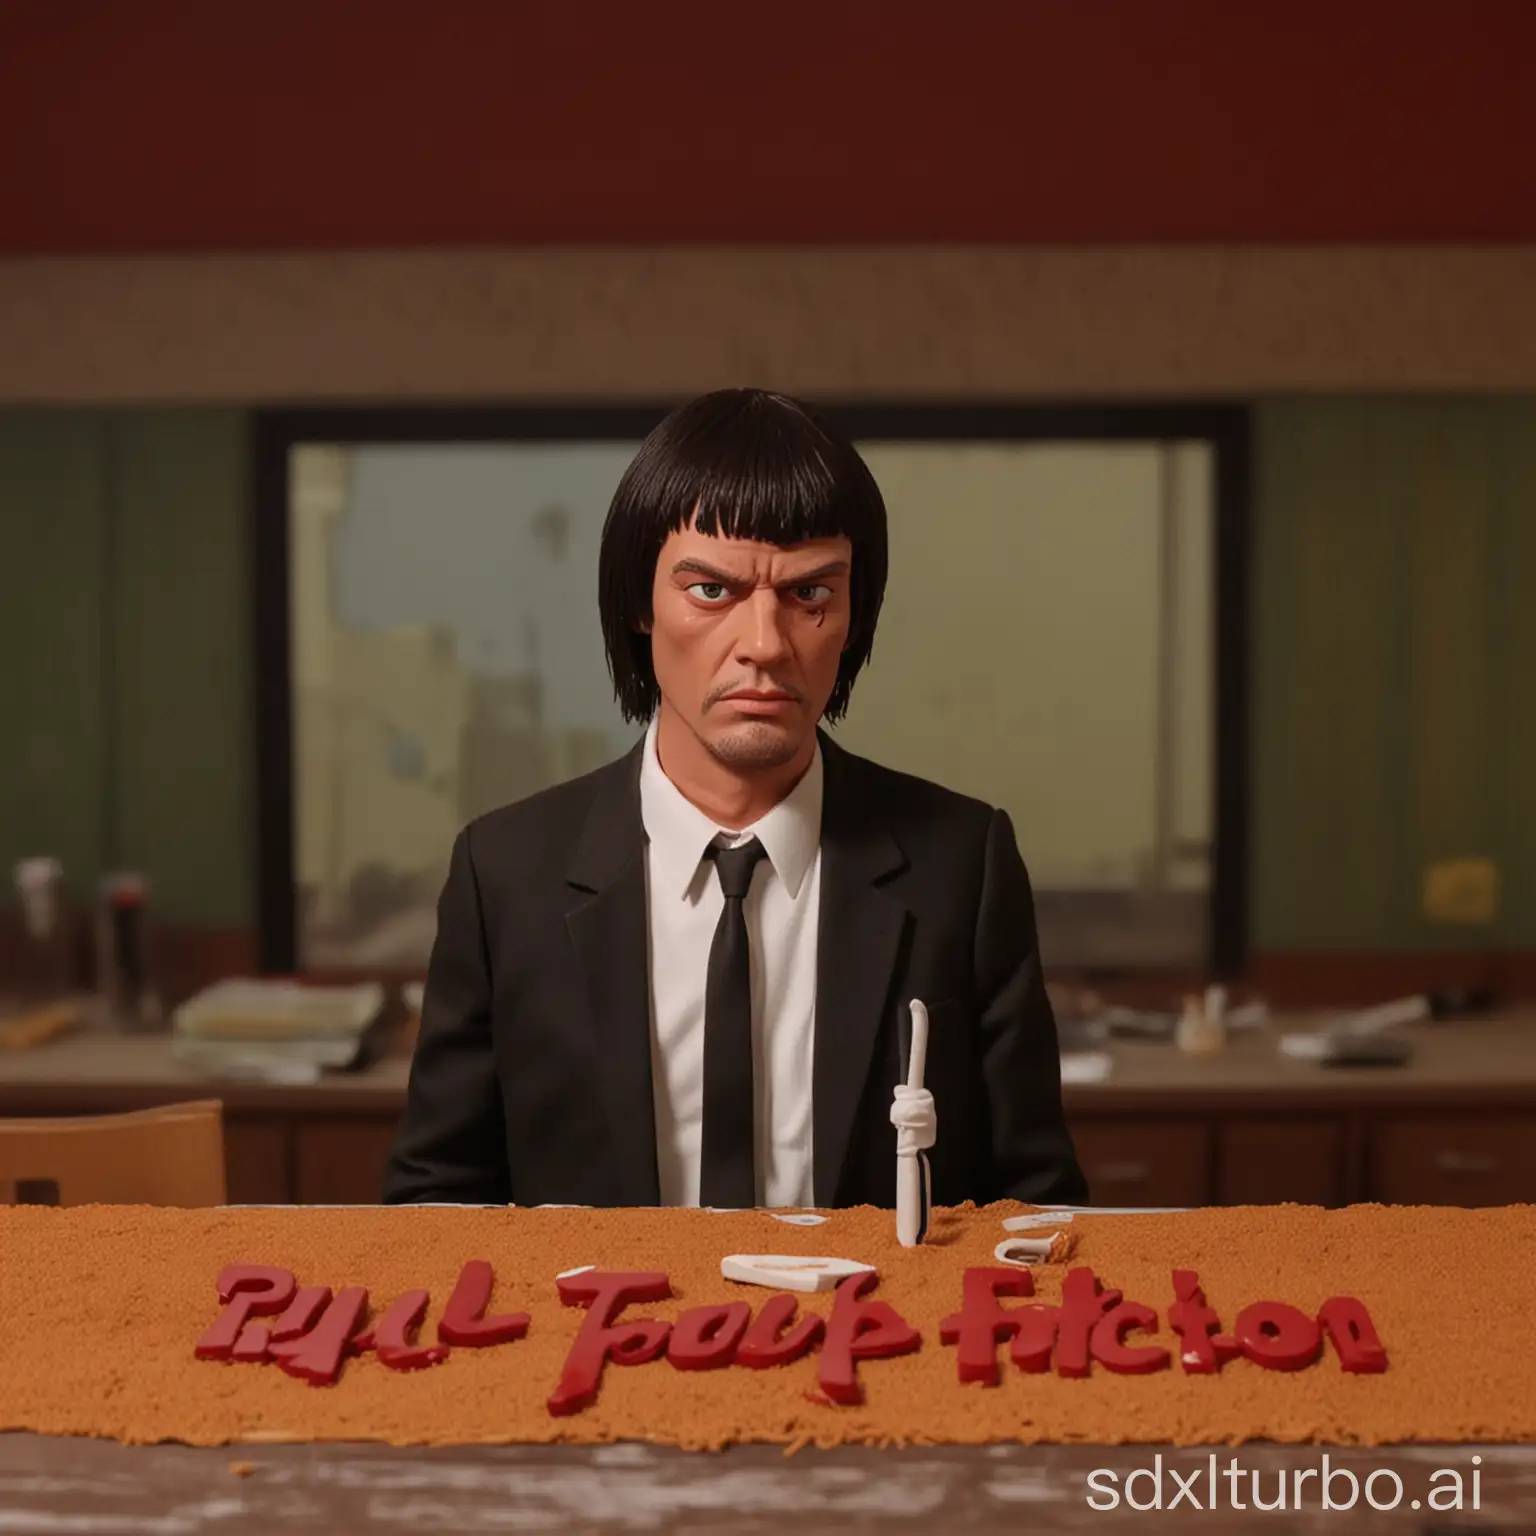 Pulp Fiction stop motion animation